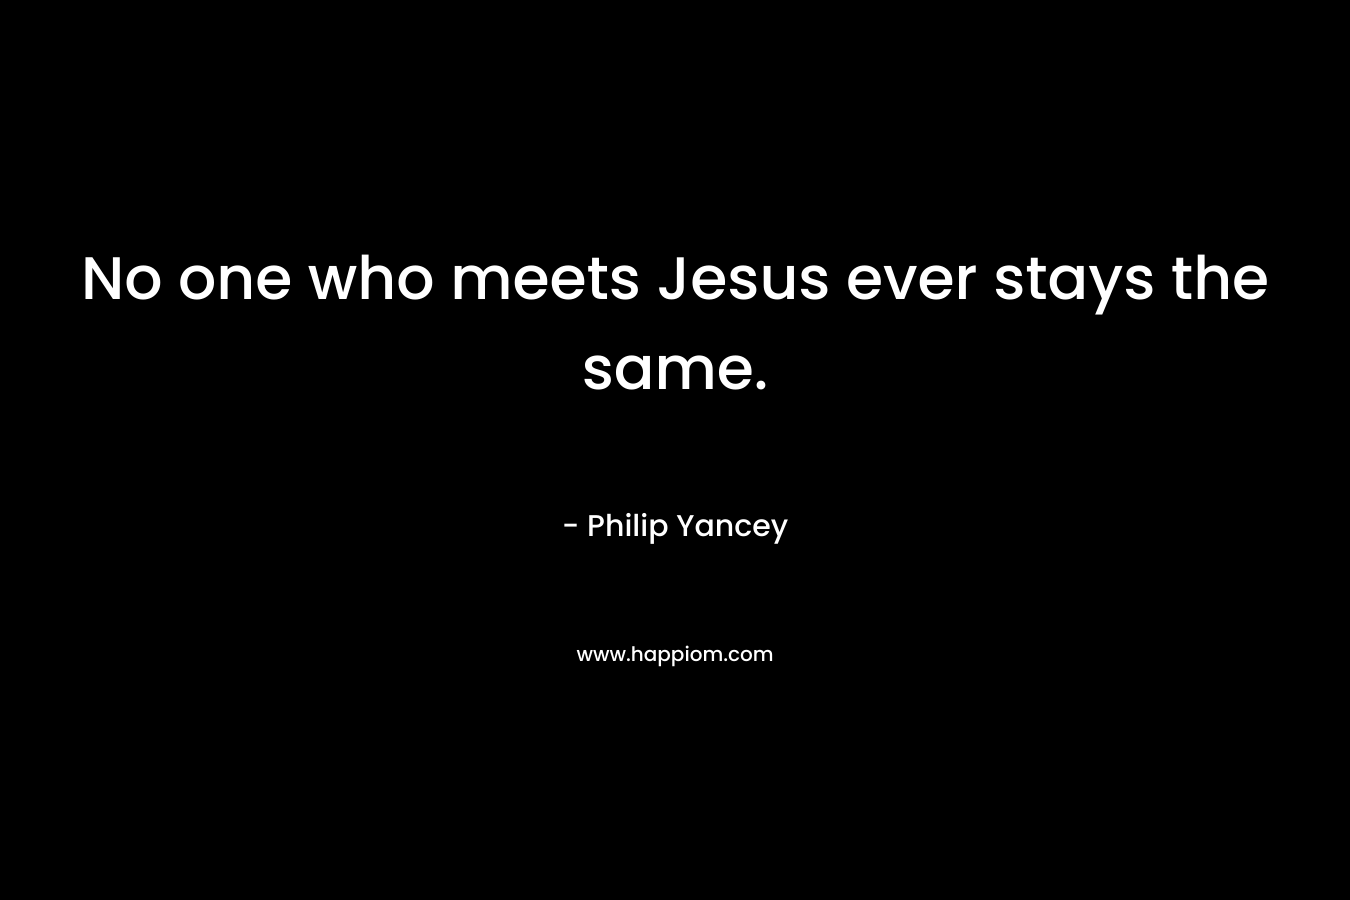 No one who meets Jesus ever stays the same. – Philip Yancey